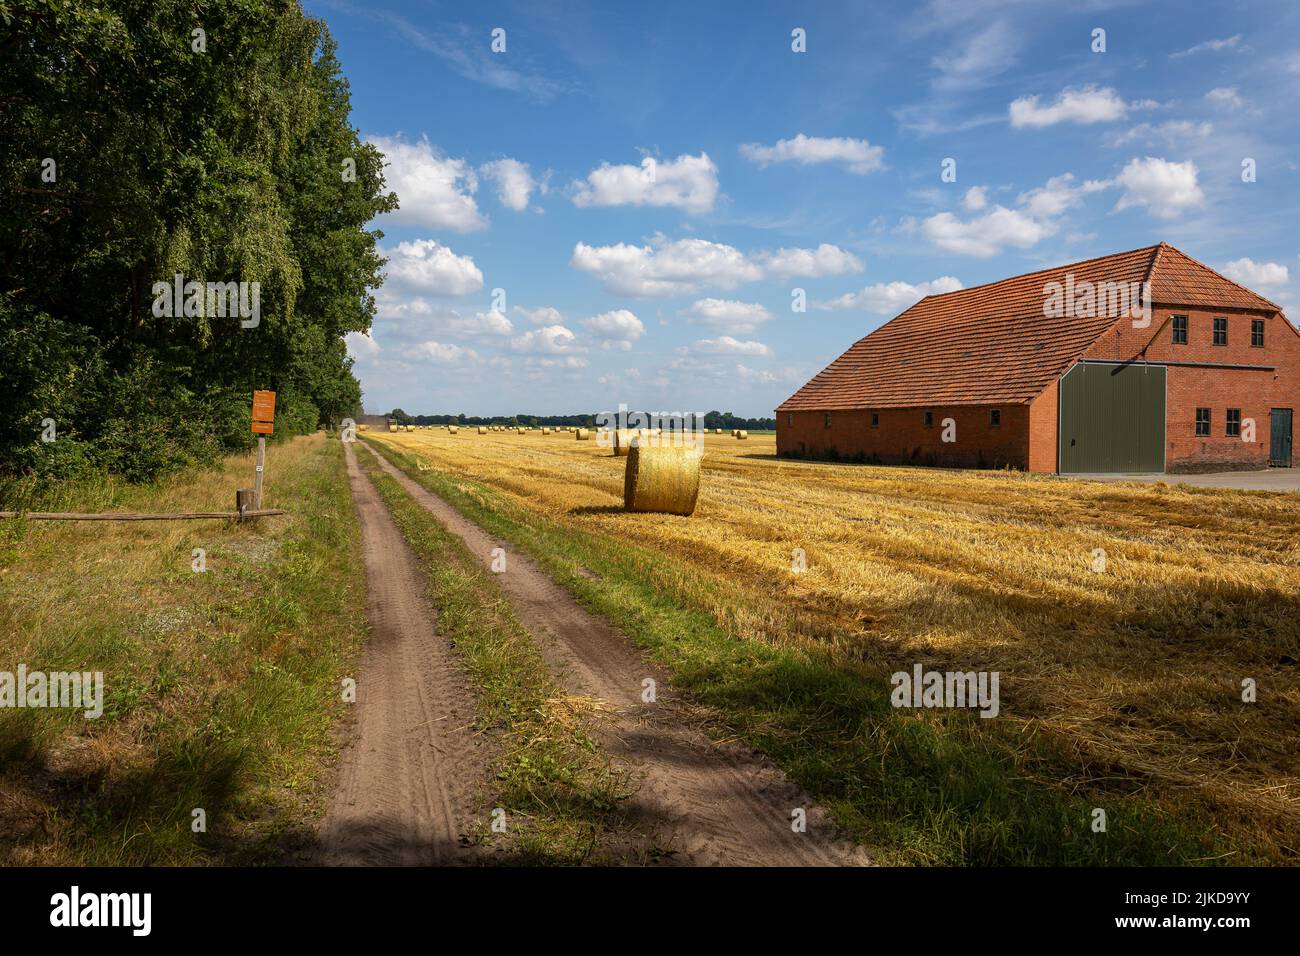 The farmer makes golden yellow straw bales from the straw on the farmland, after harvesting the grain. Stock Photo